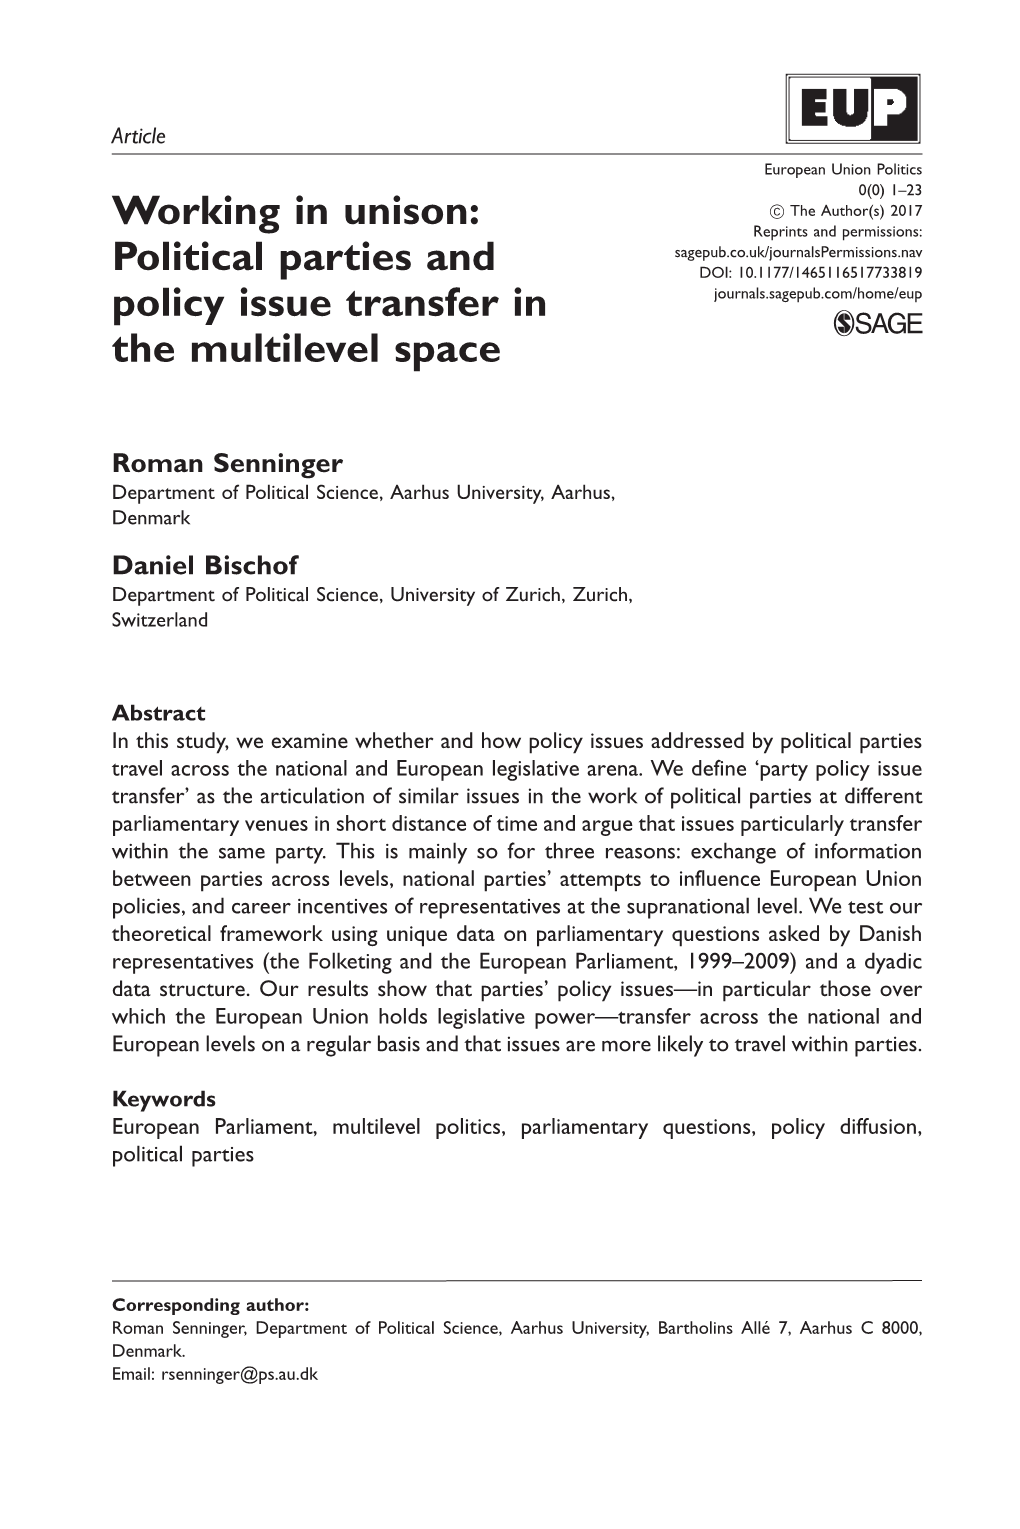 Working in Unison: Political Parties and Policy Issue Transfer in The